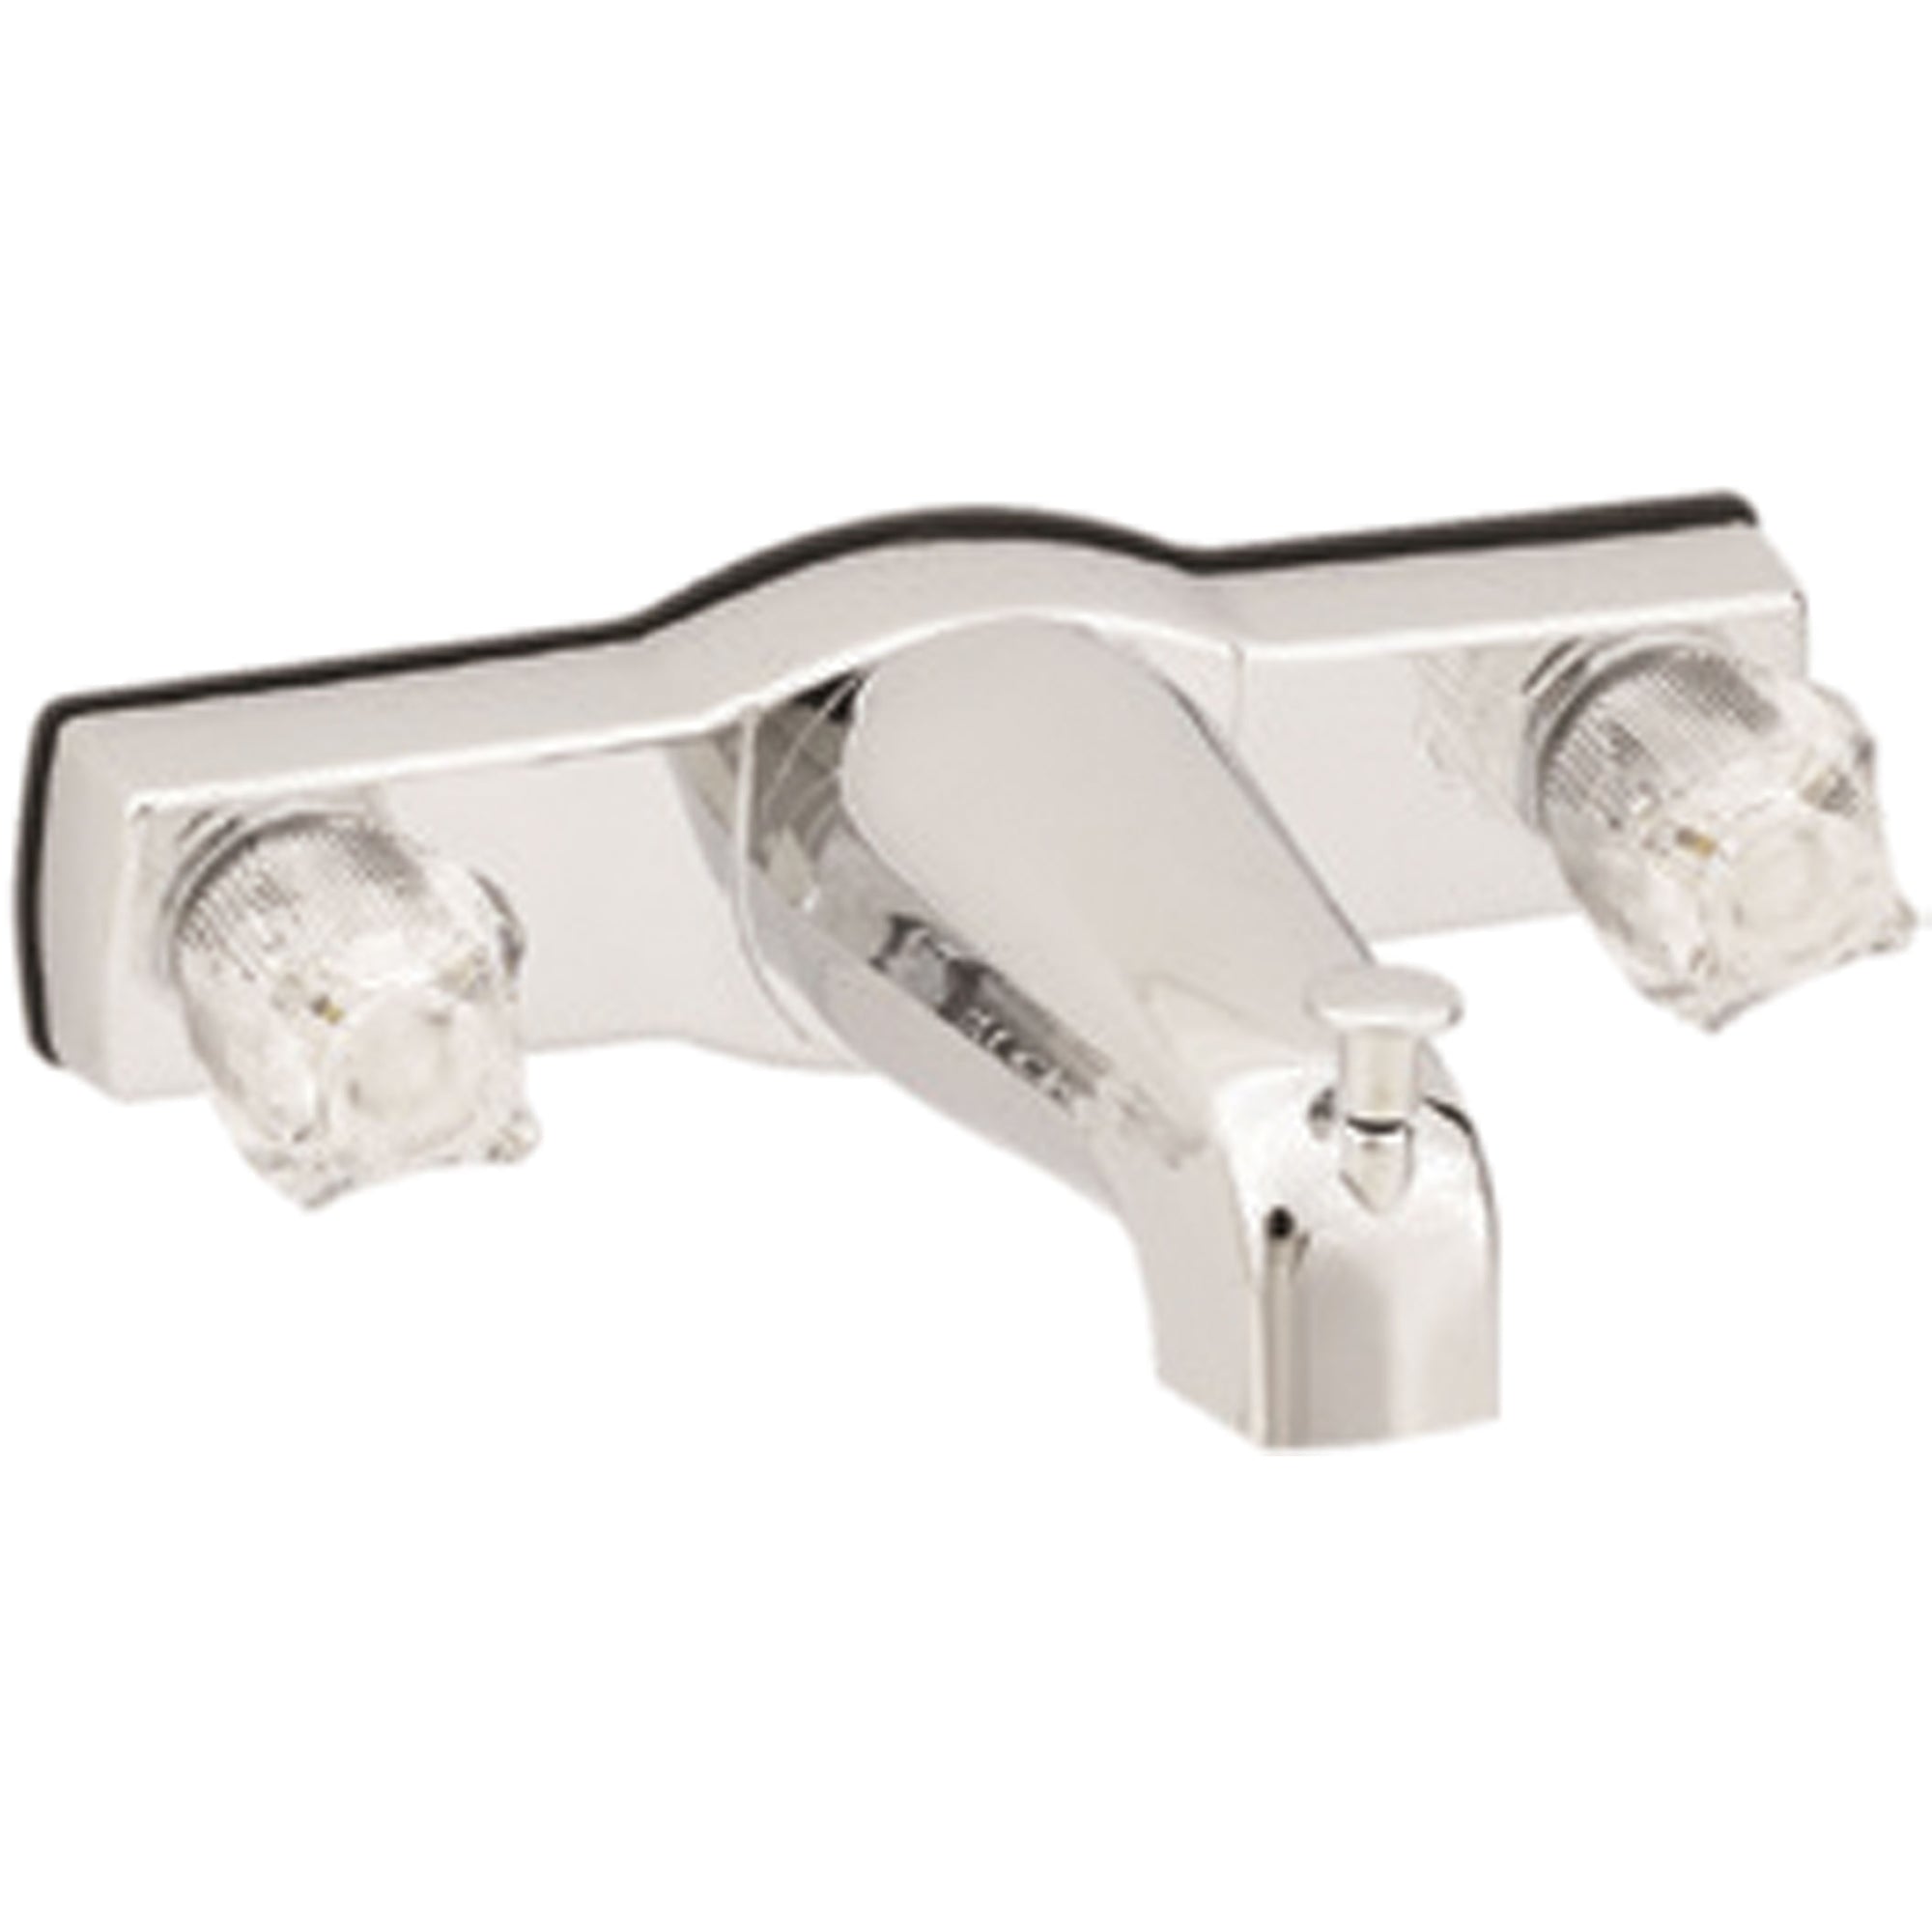 Empire Brass U-YJW68-OFS RV Tub/Shower Diverter with Crystal Handles, Offset Shanks and Shower Head - 8", Chrome